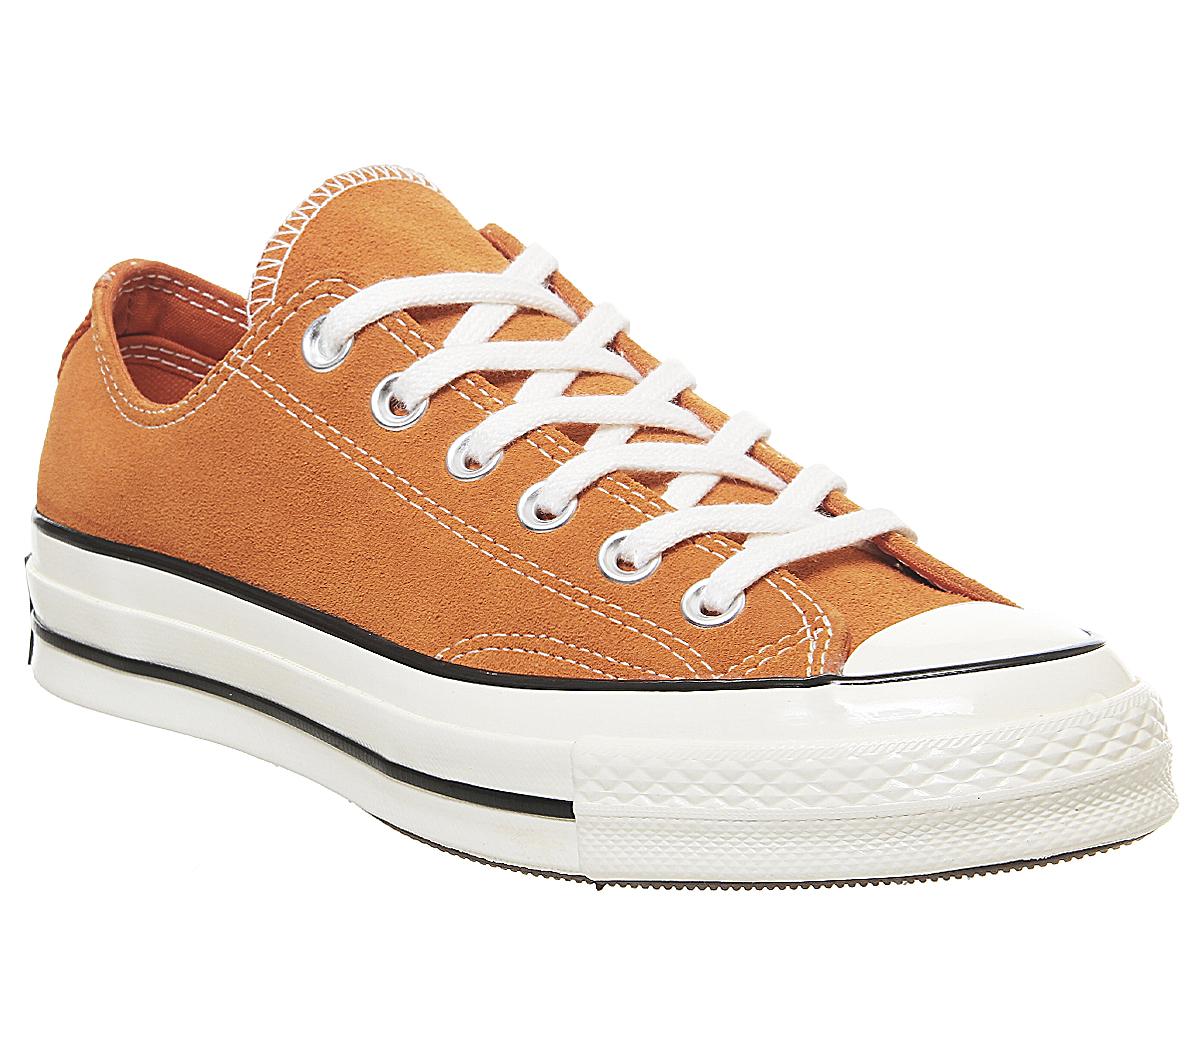 converse all star ox 70's